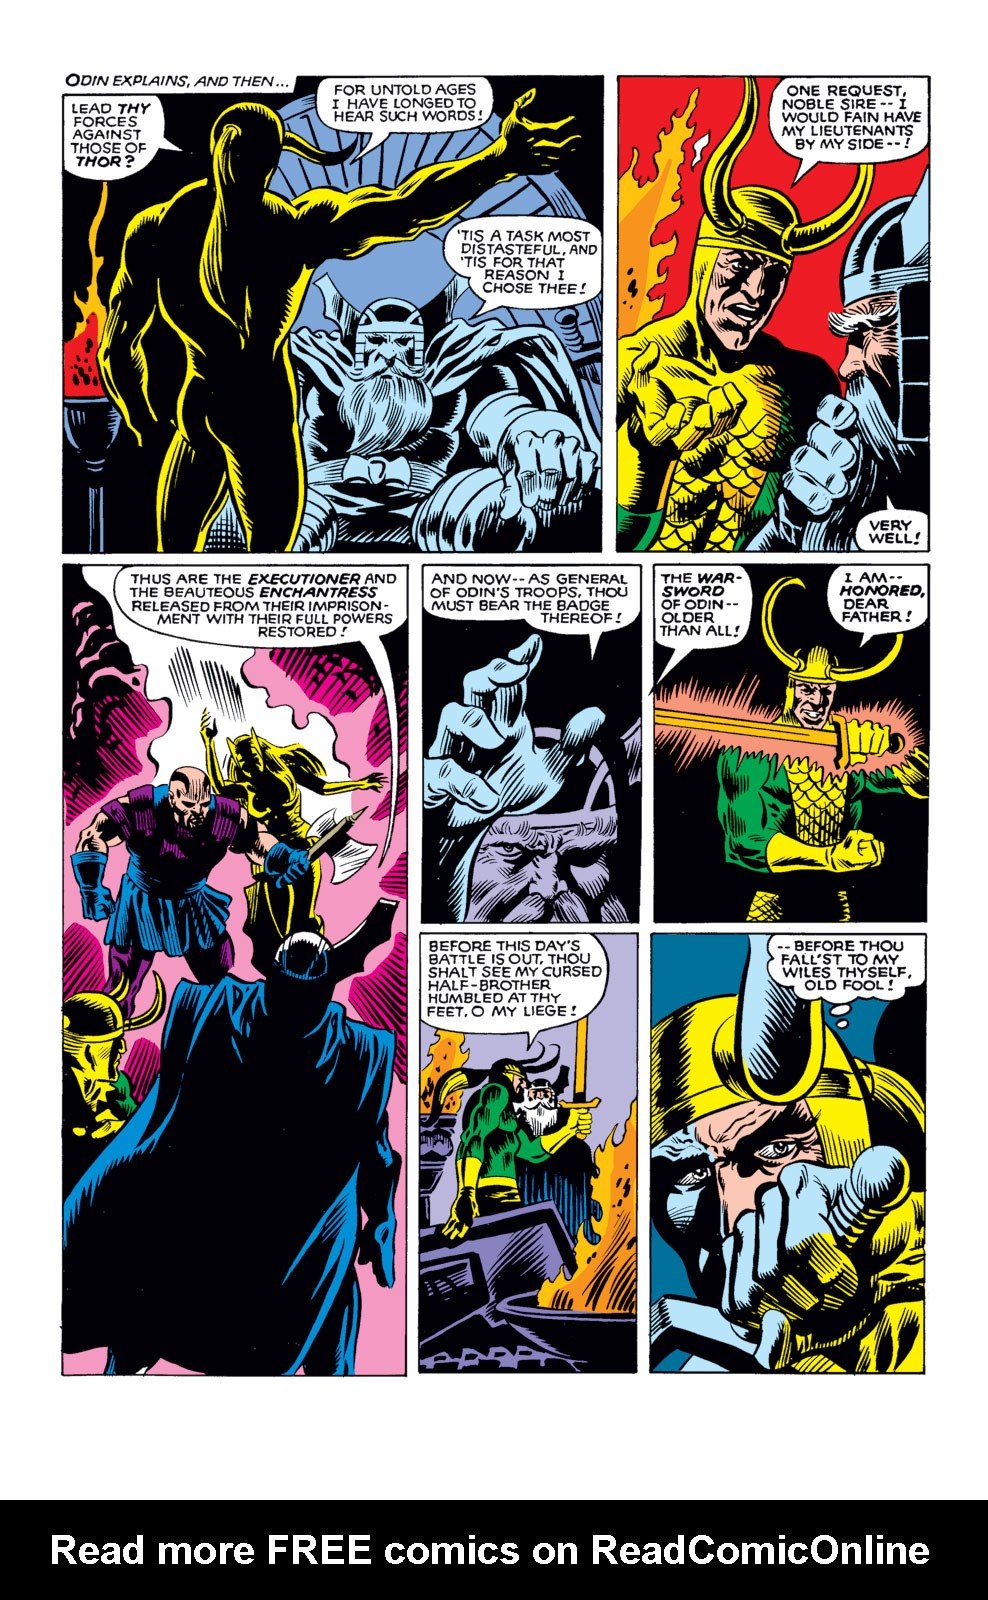 What If? (1977) issue 25 - Thor and the Avengers battled the gods - Page 11